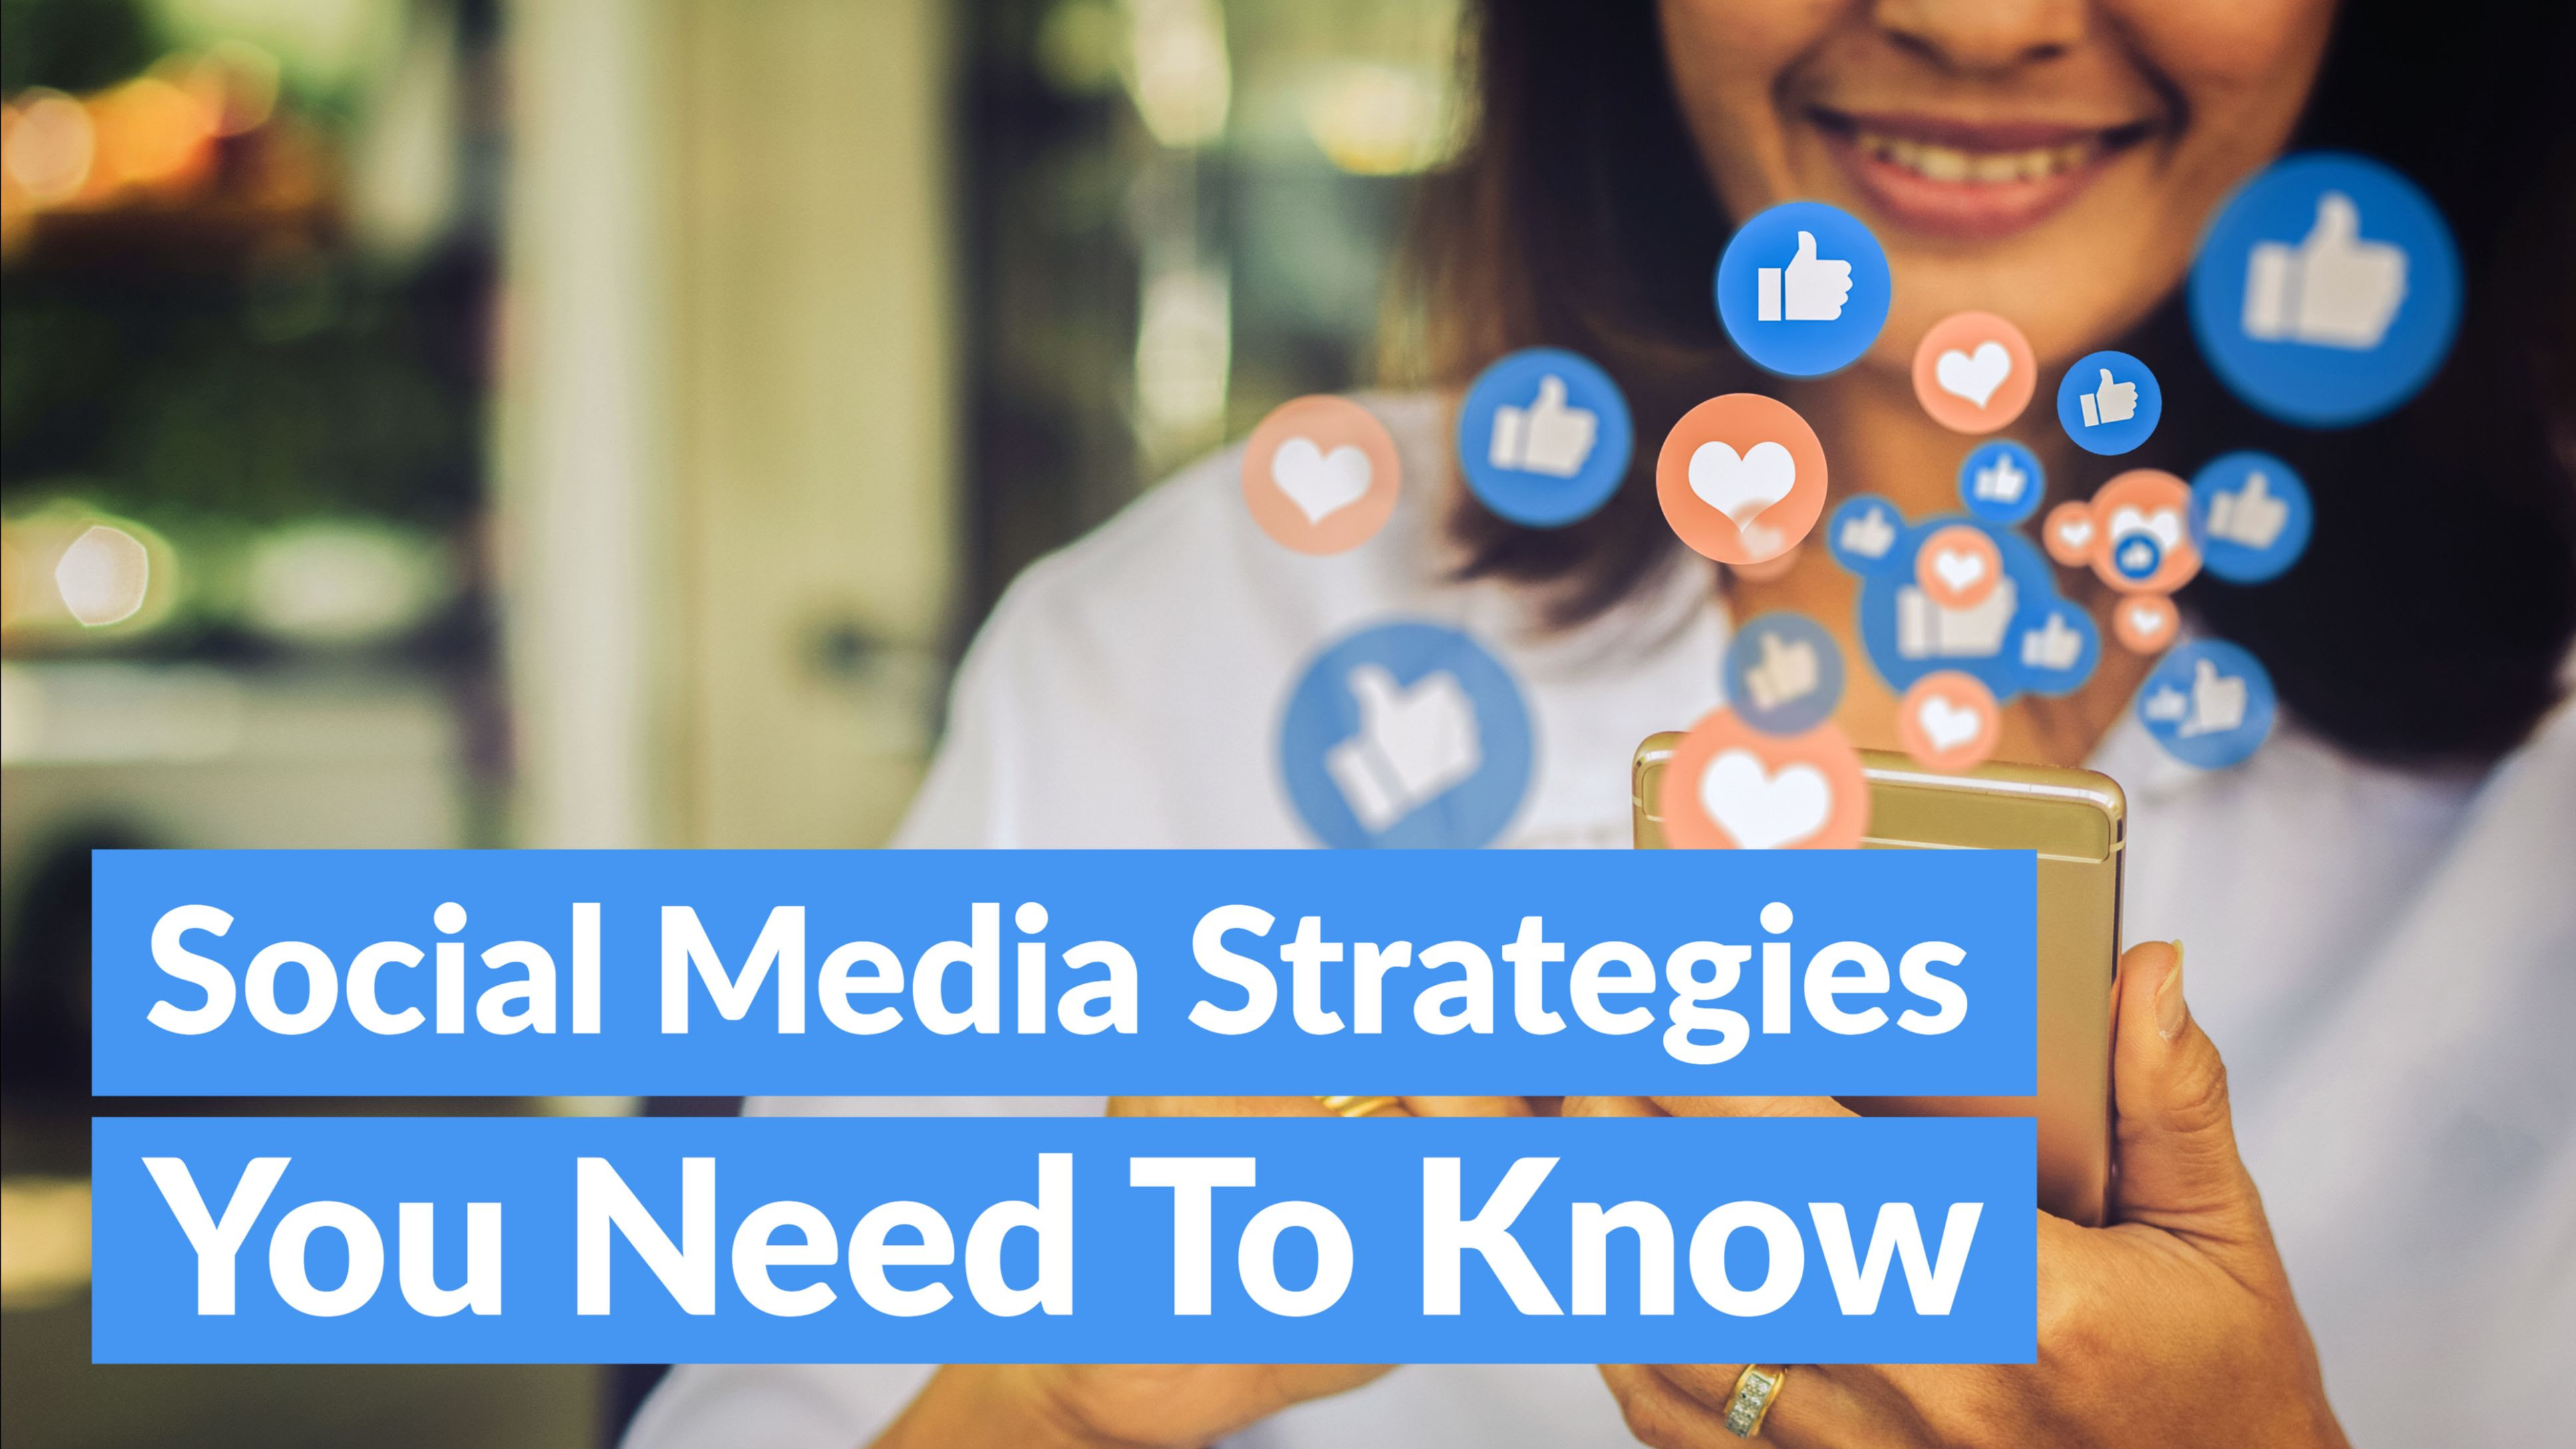 10 Social Media Strategies Every Lawyer Needs to Know